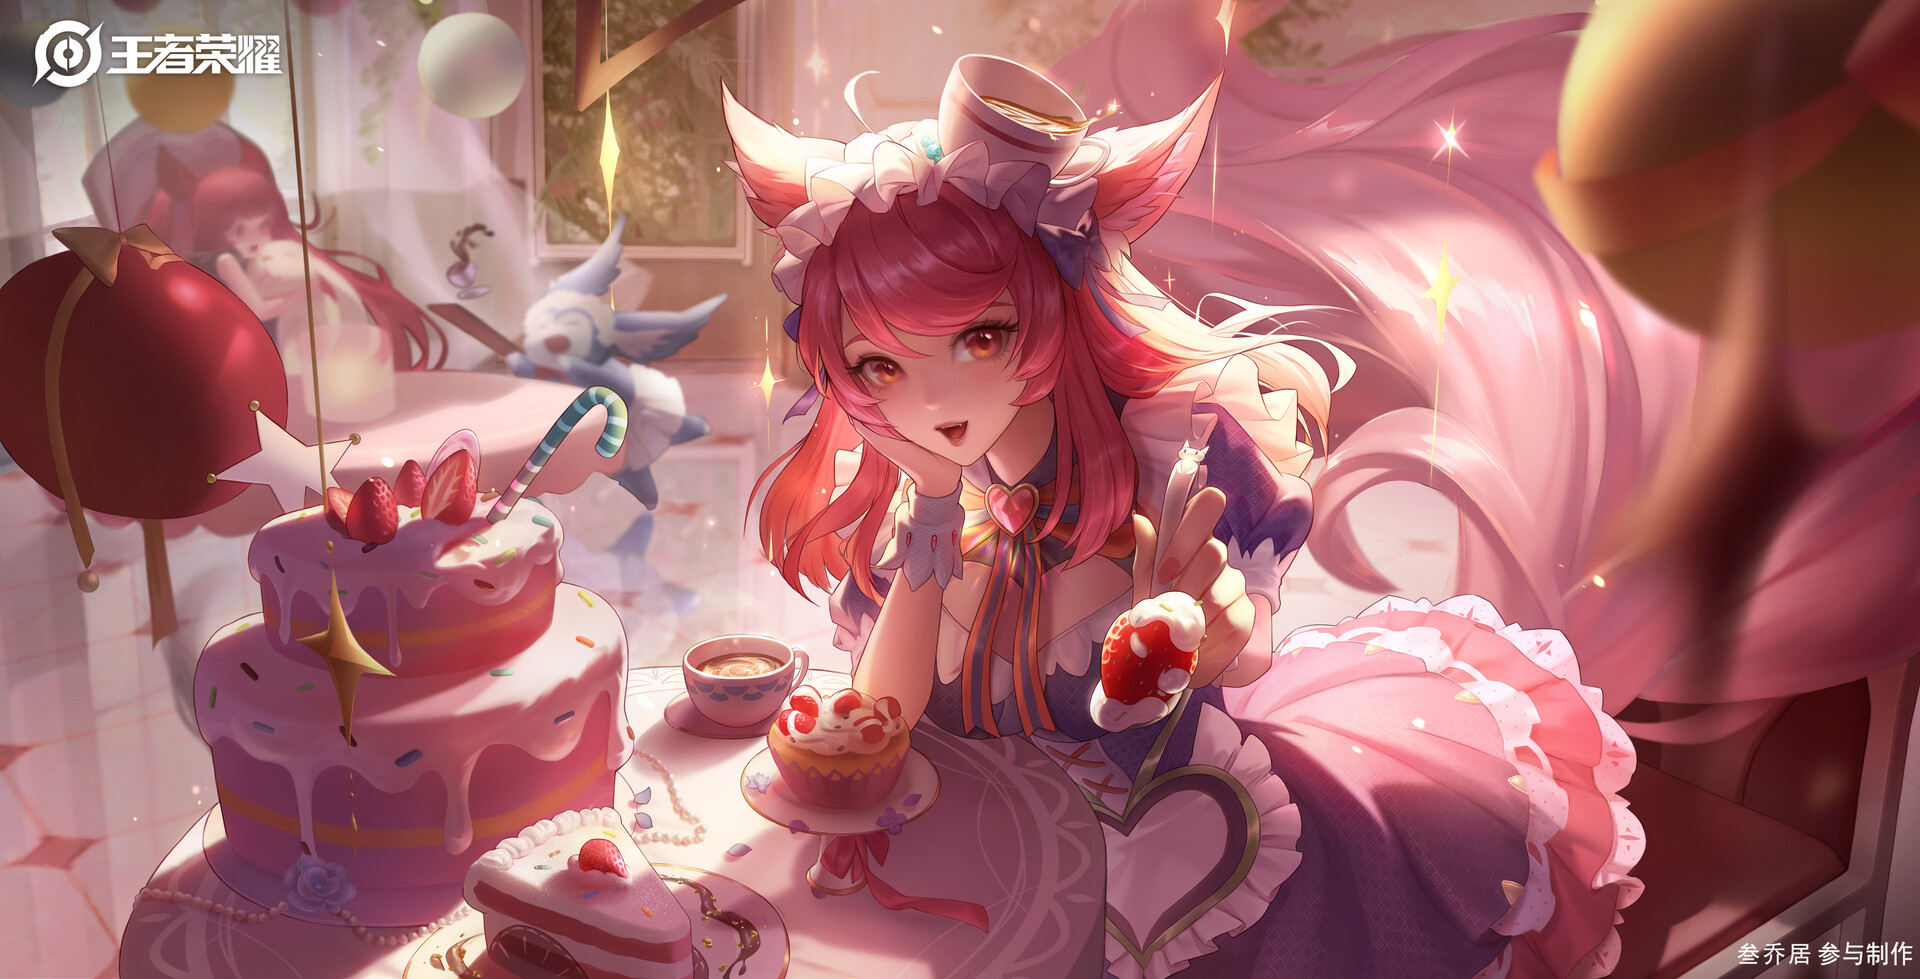 3Q Studio Drawing Women Anime Girls Redhead Smiling Pink Hair Cake Sweets Cup Strawberries Food Look 1920x979